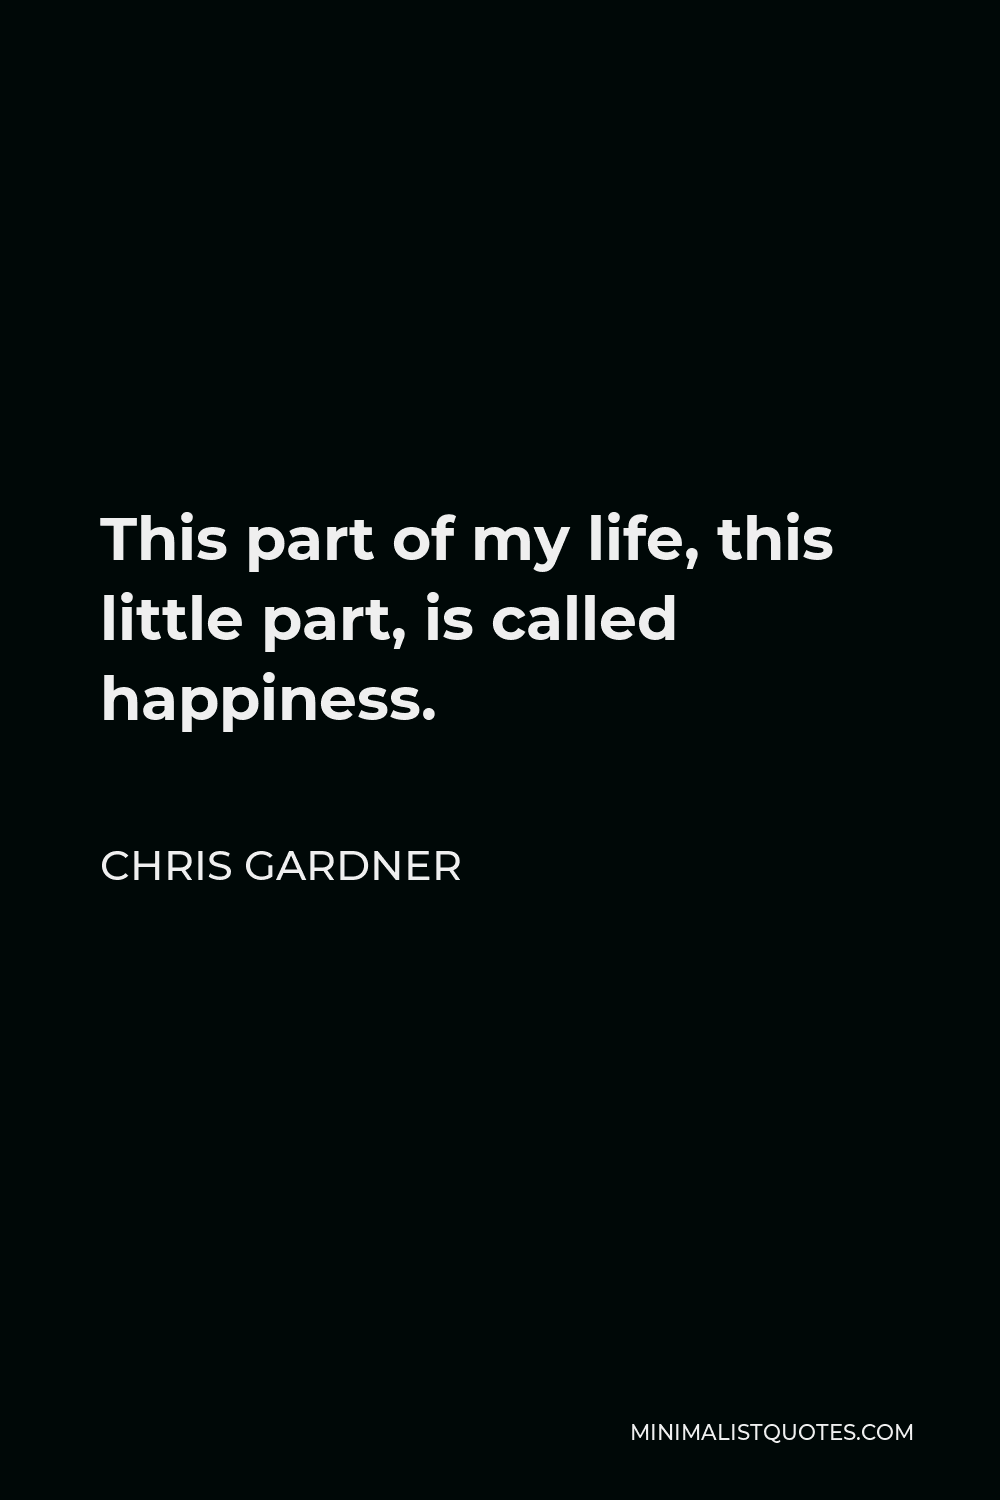 Chris Gardner Quote - This part of my life, this little part, is called happiness.